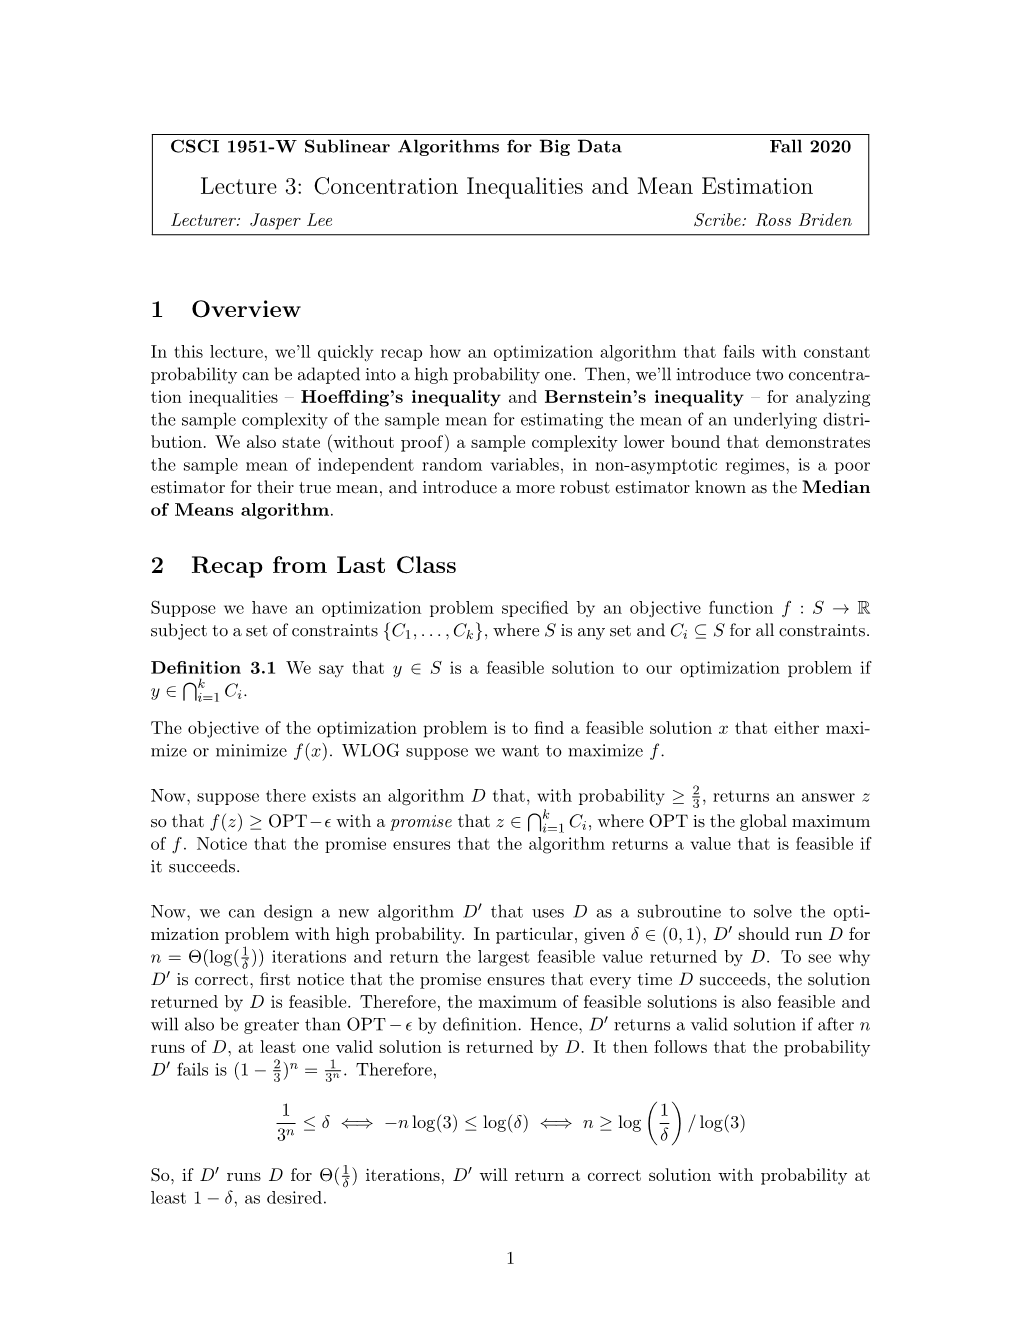 Lecture 3: Concentration Inequalities and Mean Estimation Lecturer: Jasper Lee Scribe: Ross Briden